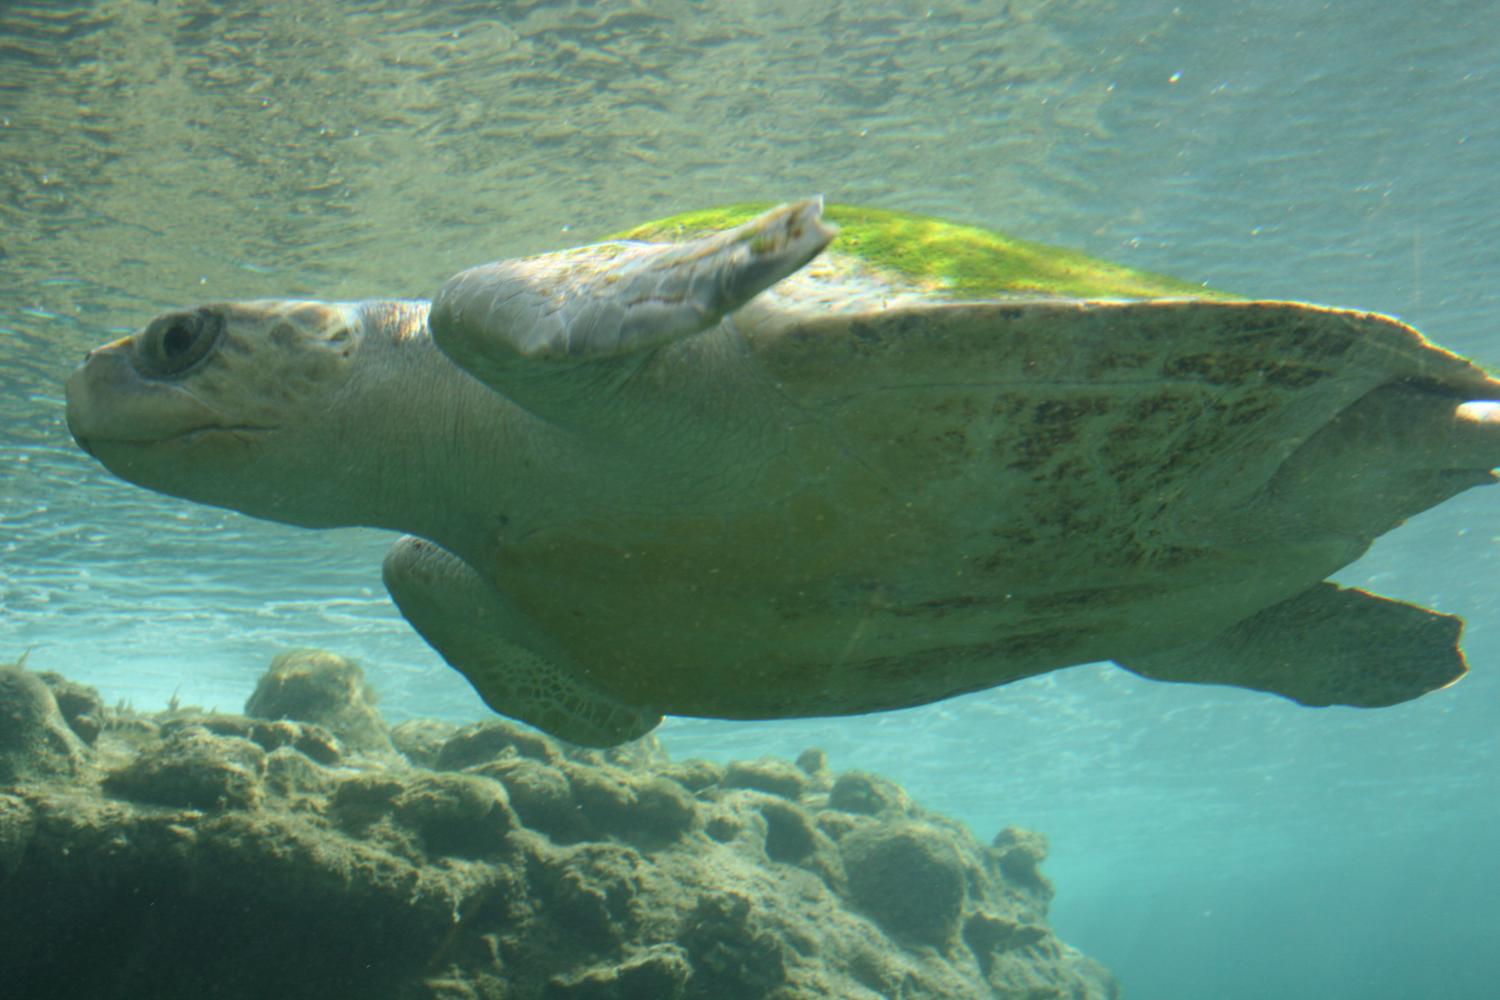 Habitats for endangered green sea turtles will be federally protected in Florida